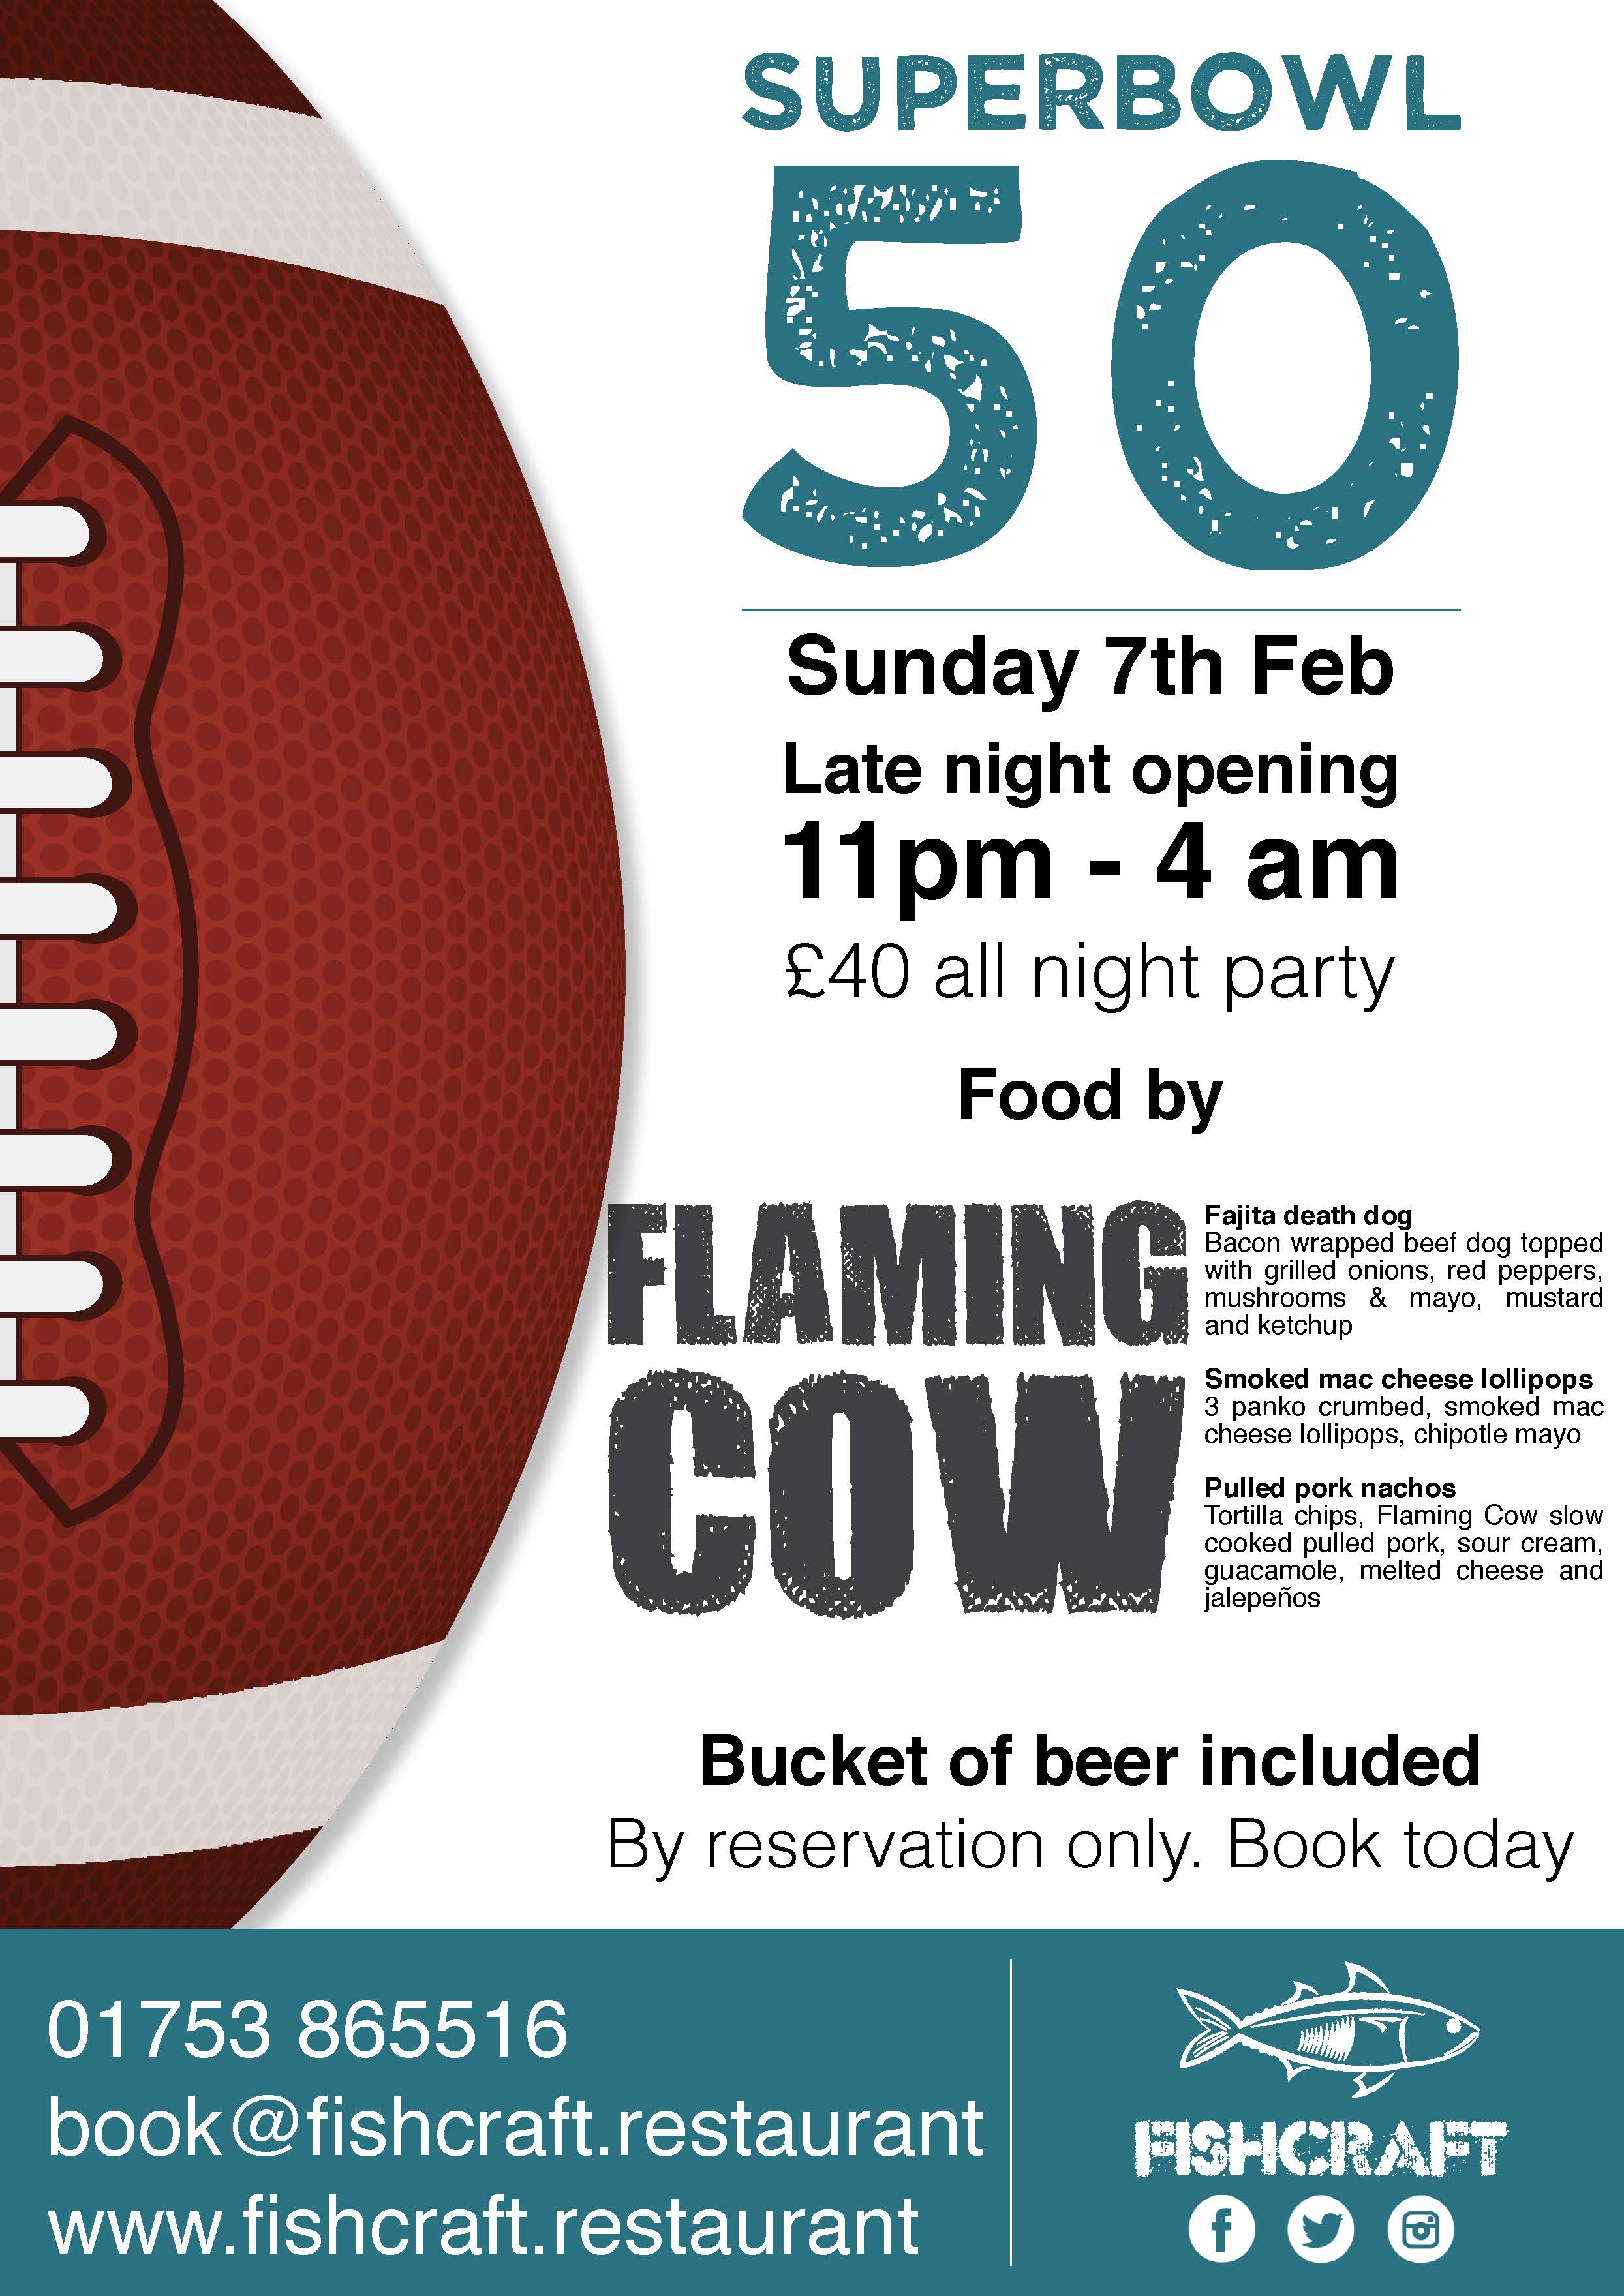 FISHCRAFT AND FLAMING COW do SUPERBOWL 50